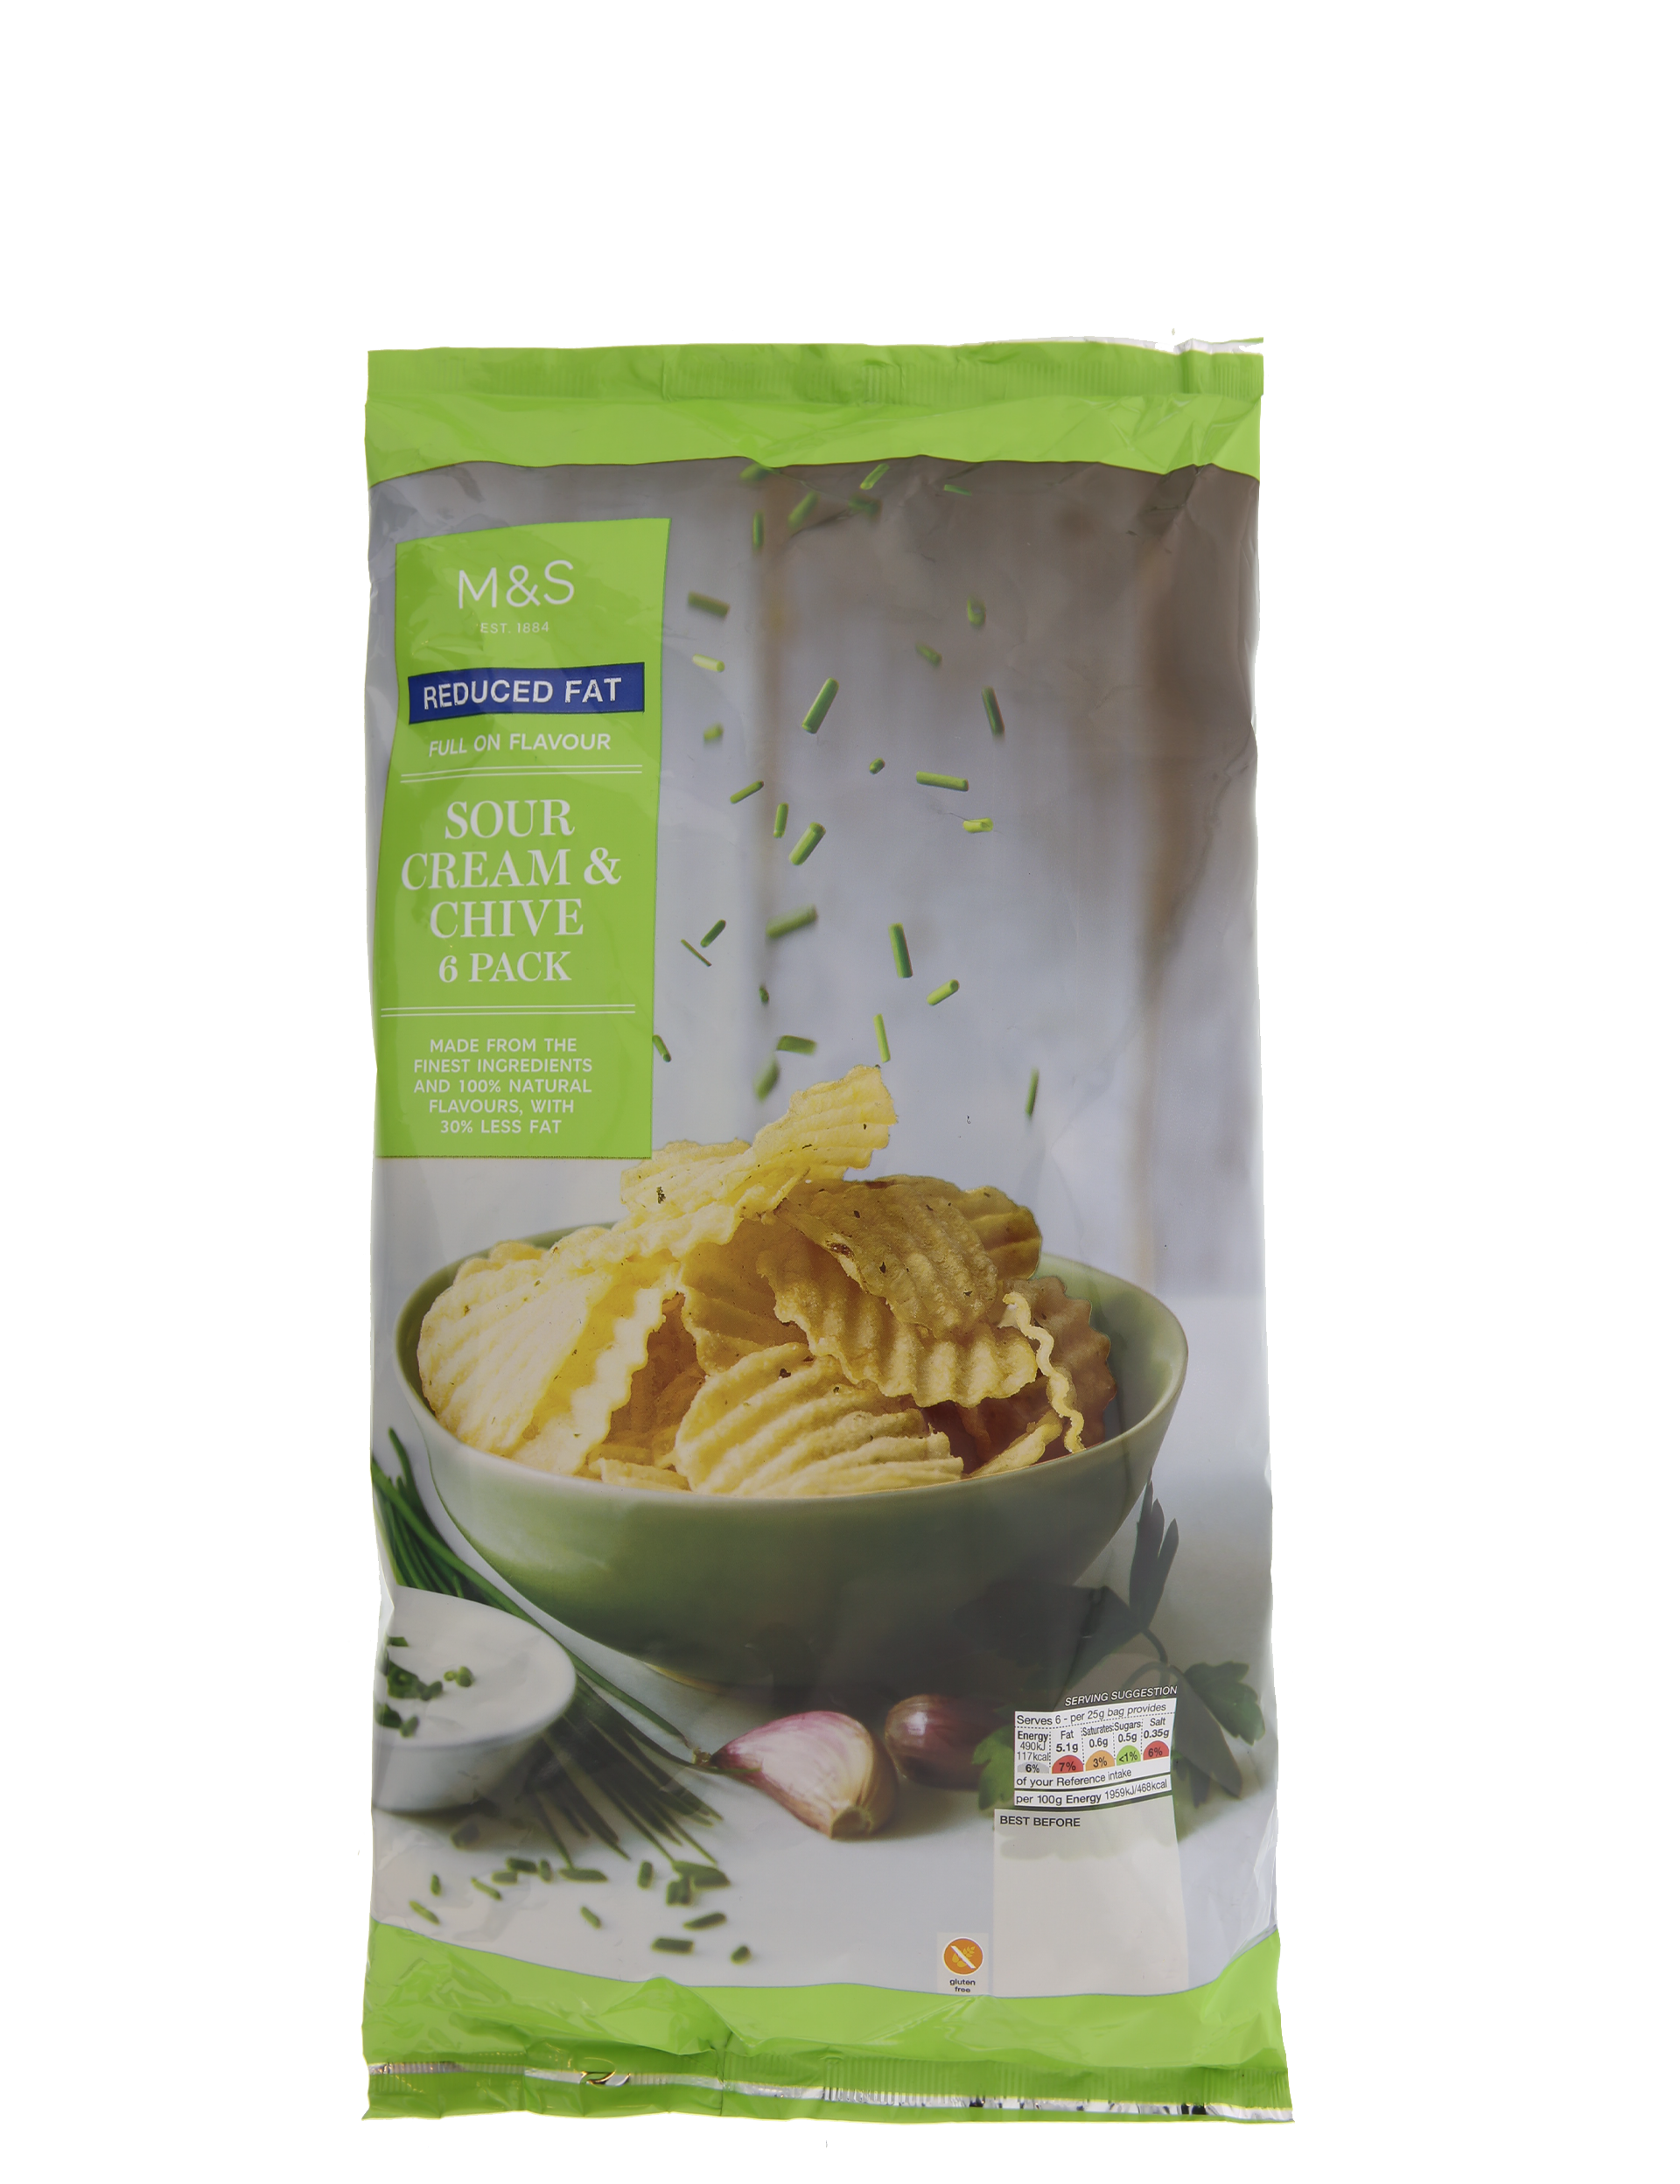  Reduced Fat Sour Cream And Chive 6 Pack 